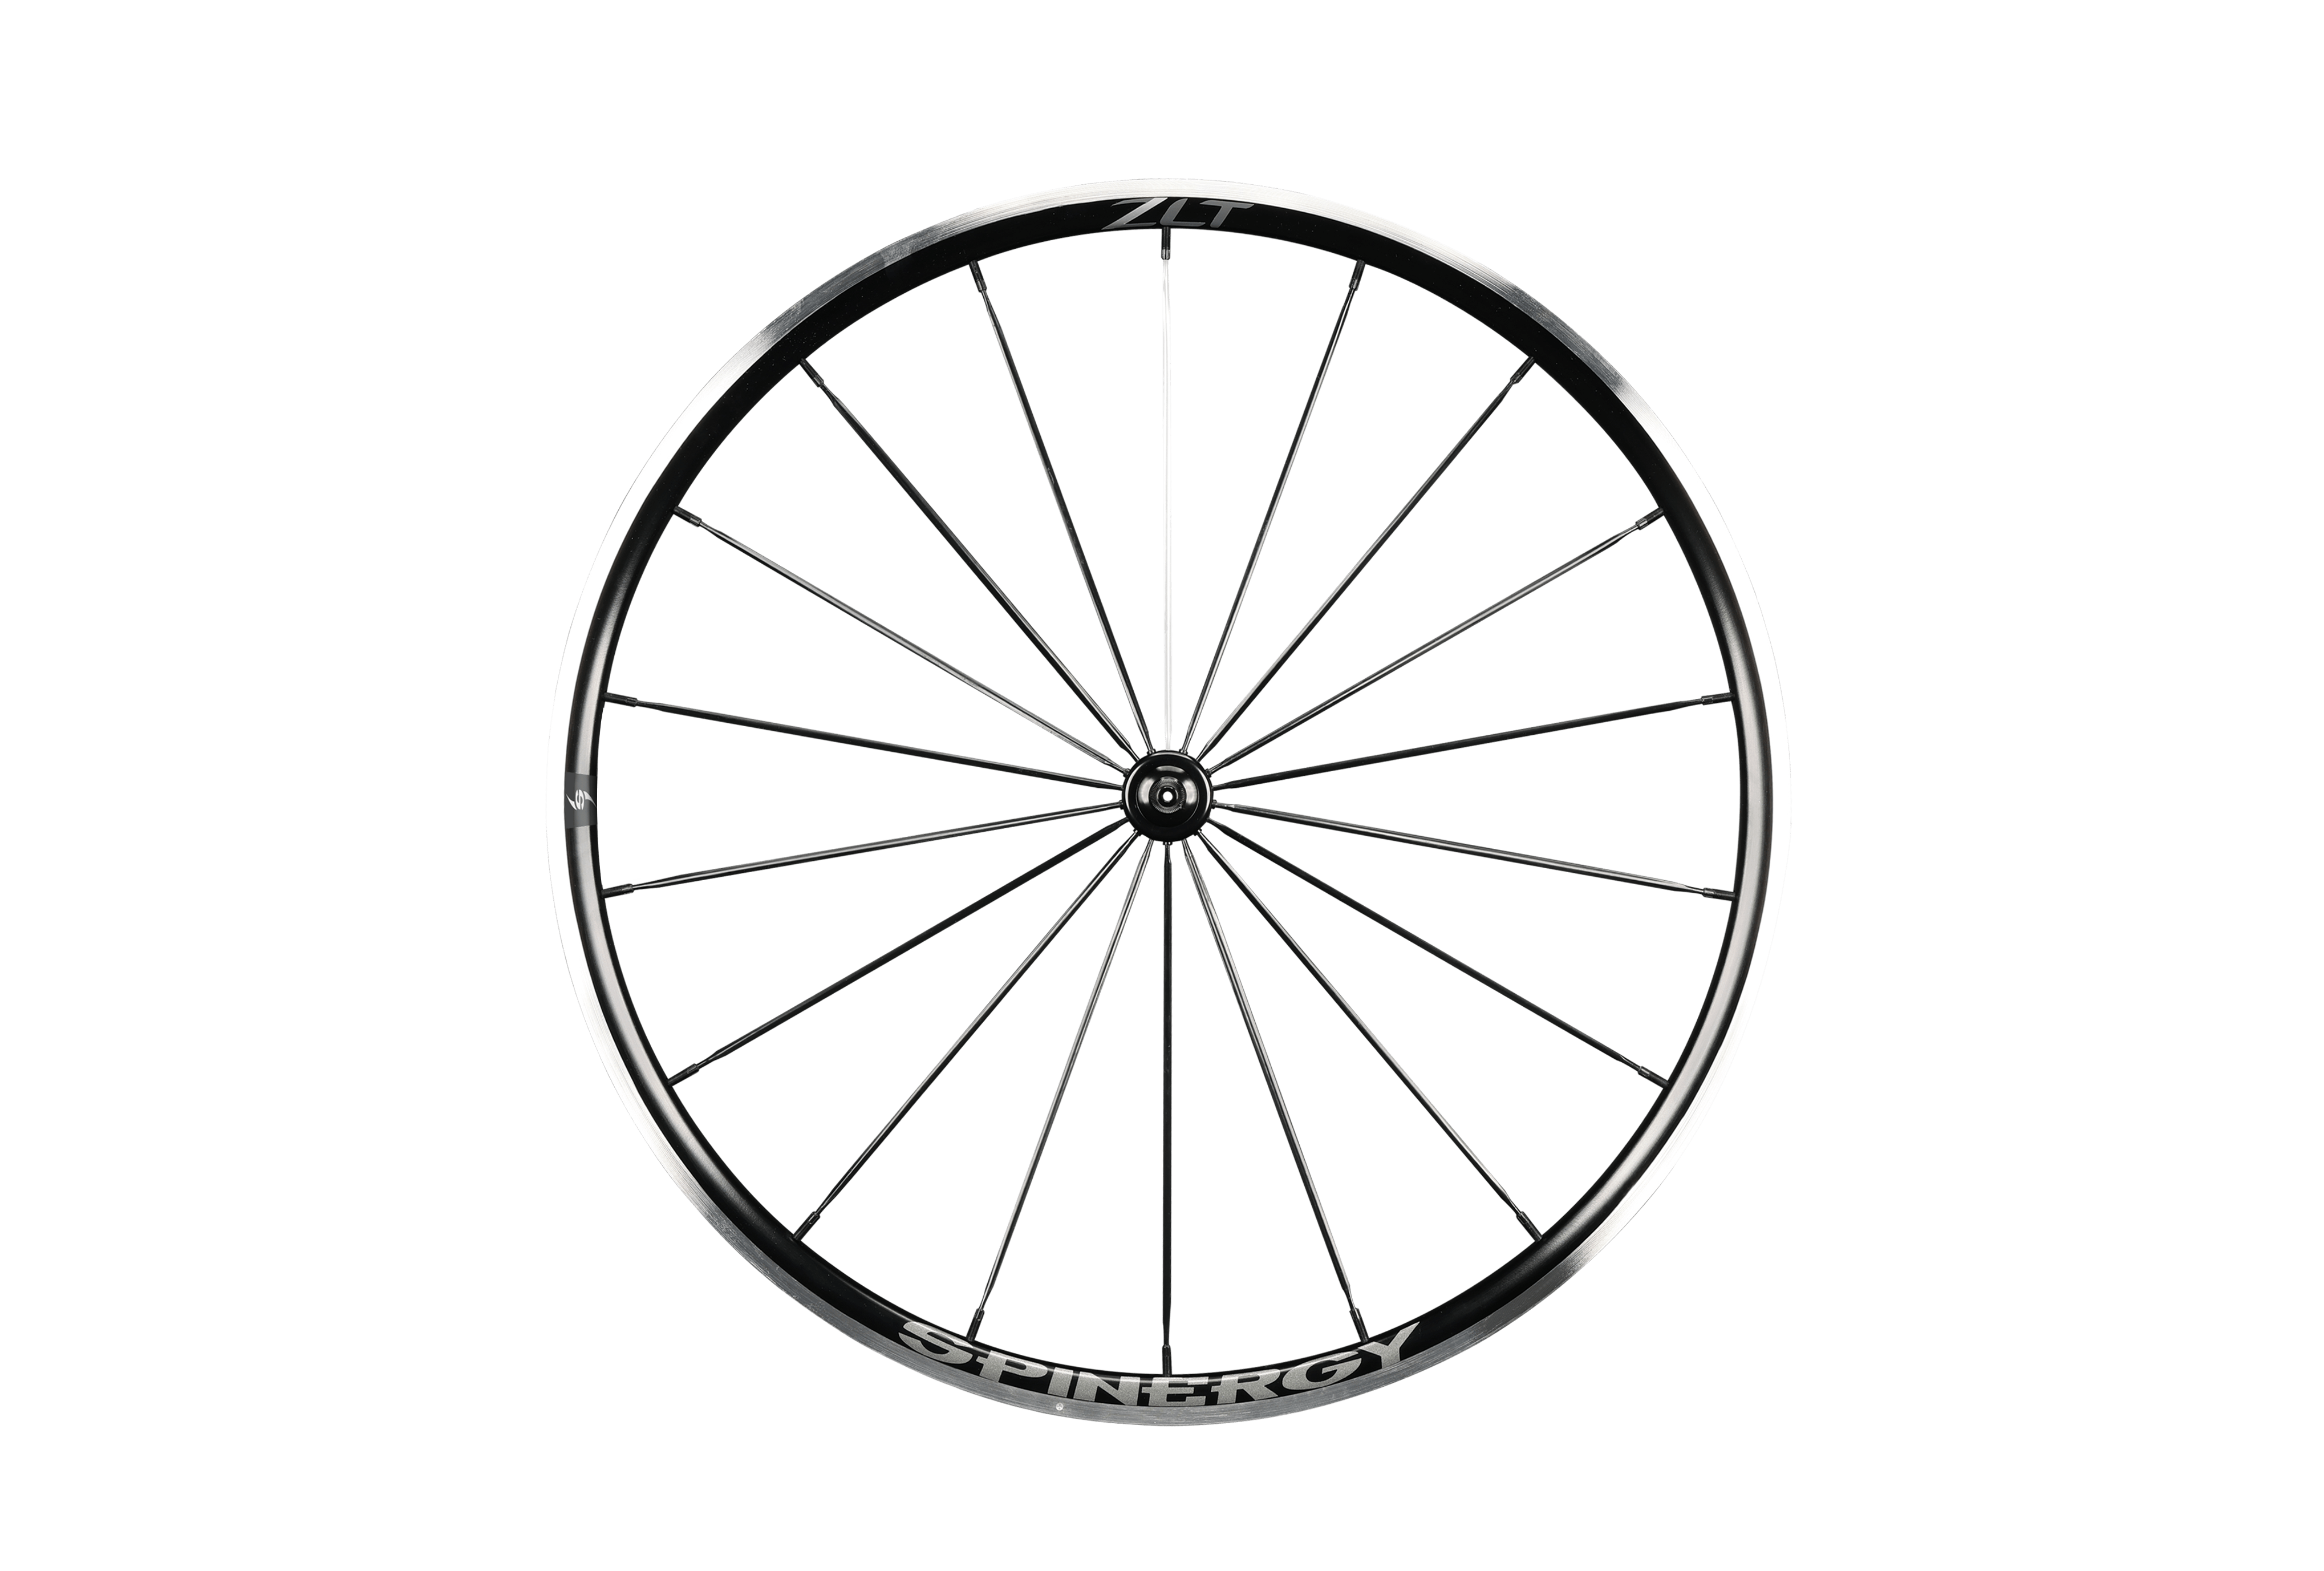 Road Bike Wheels: Built for Speed and Comfort – Spinergy